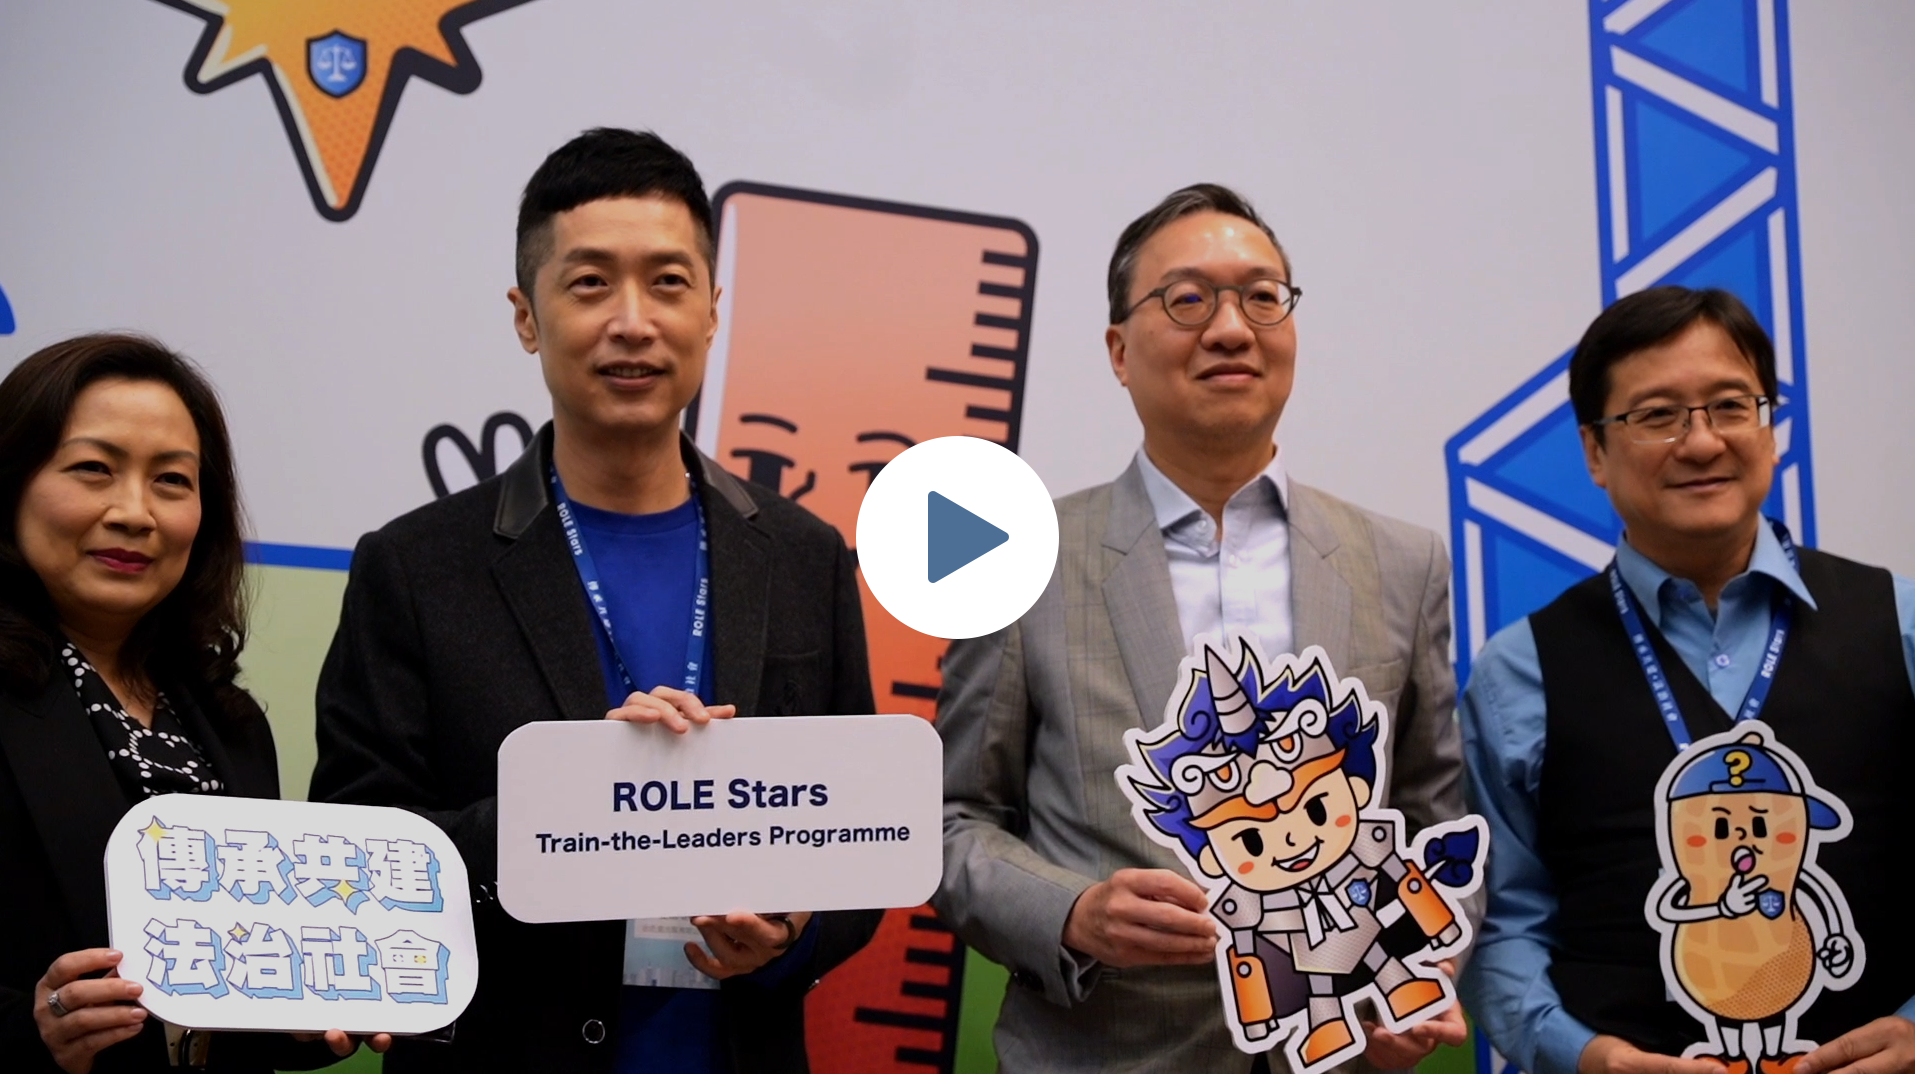 [Video] First phase of ROLE Stars Train-the-Leaders Programme concluded